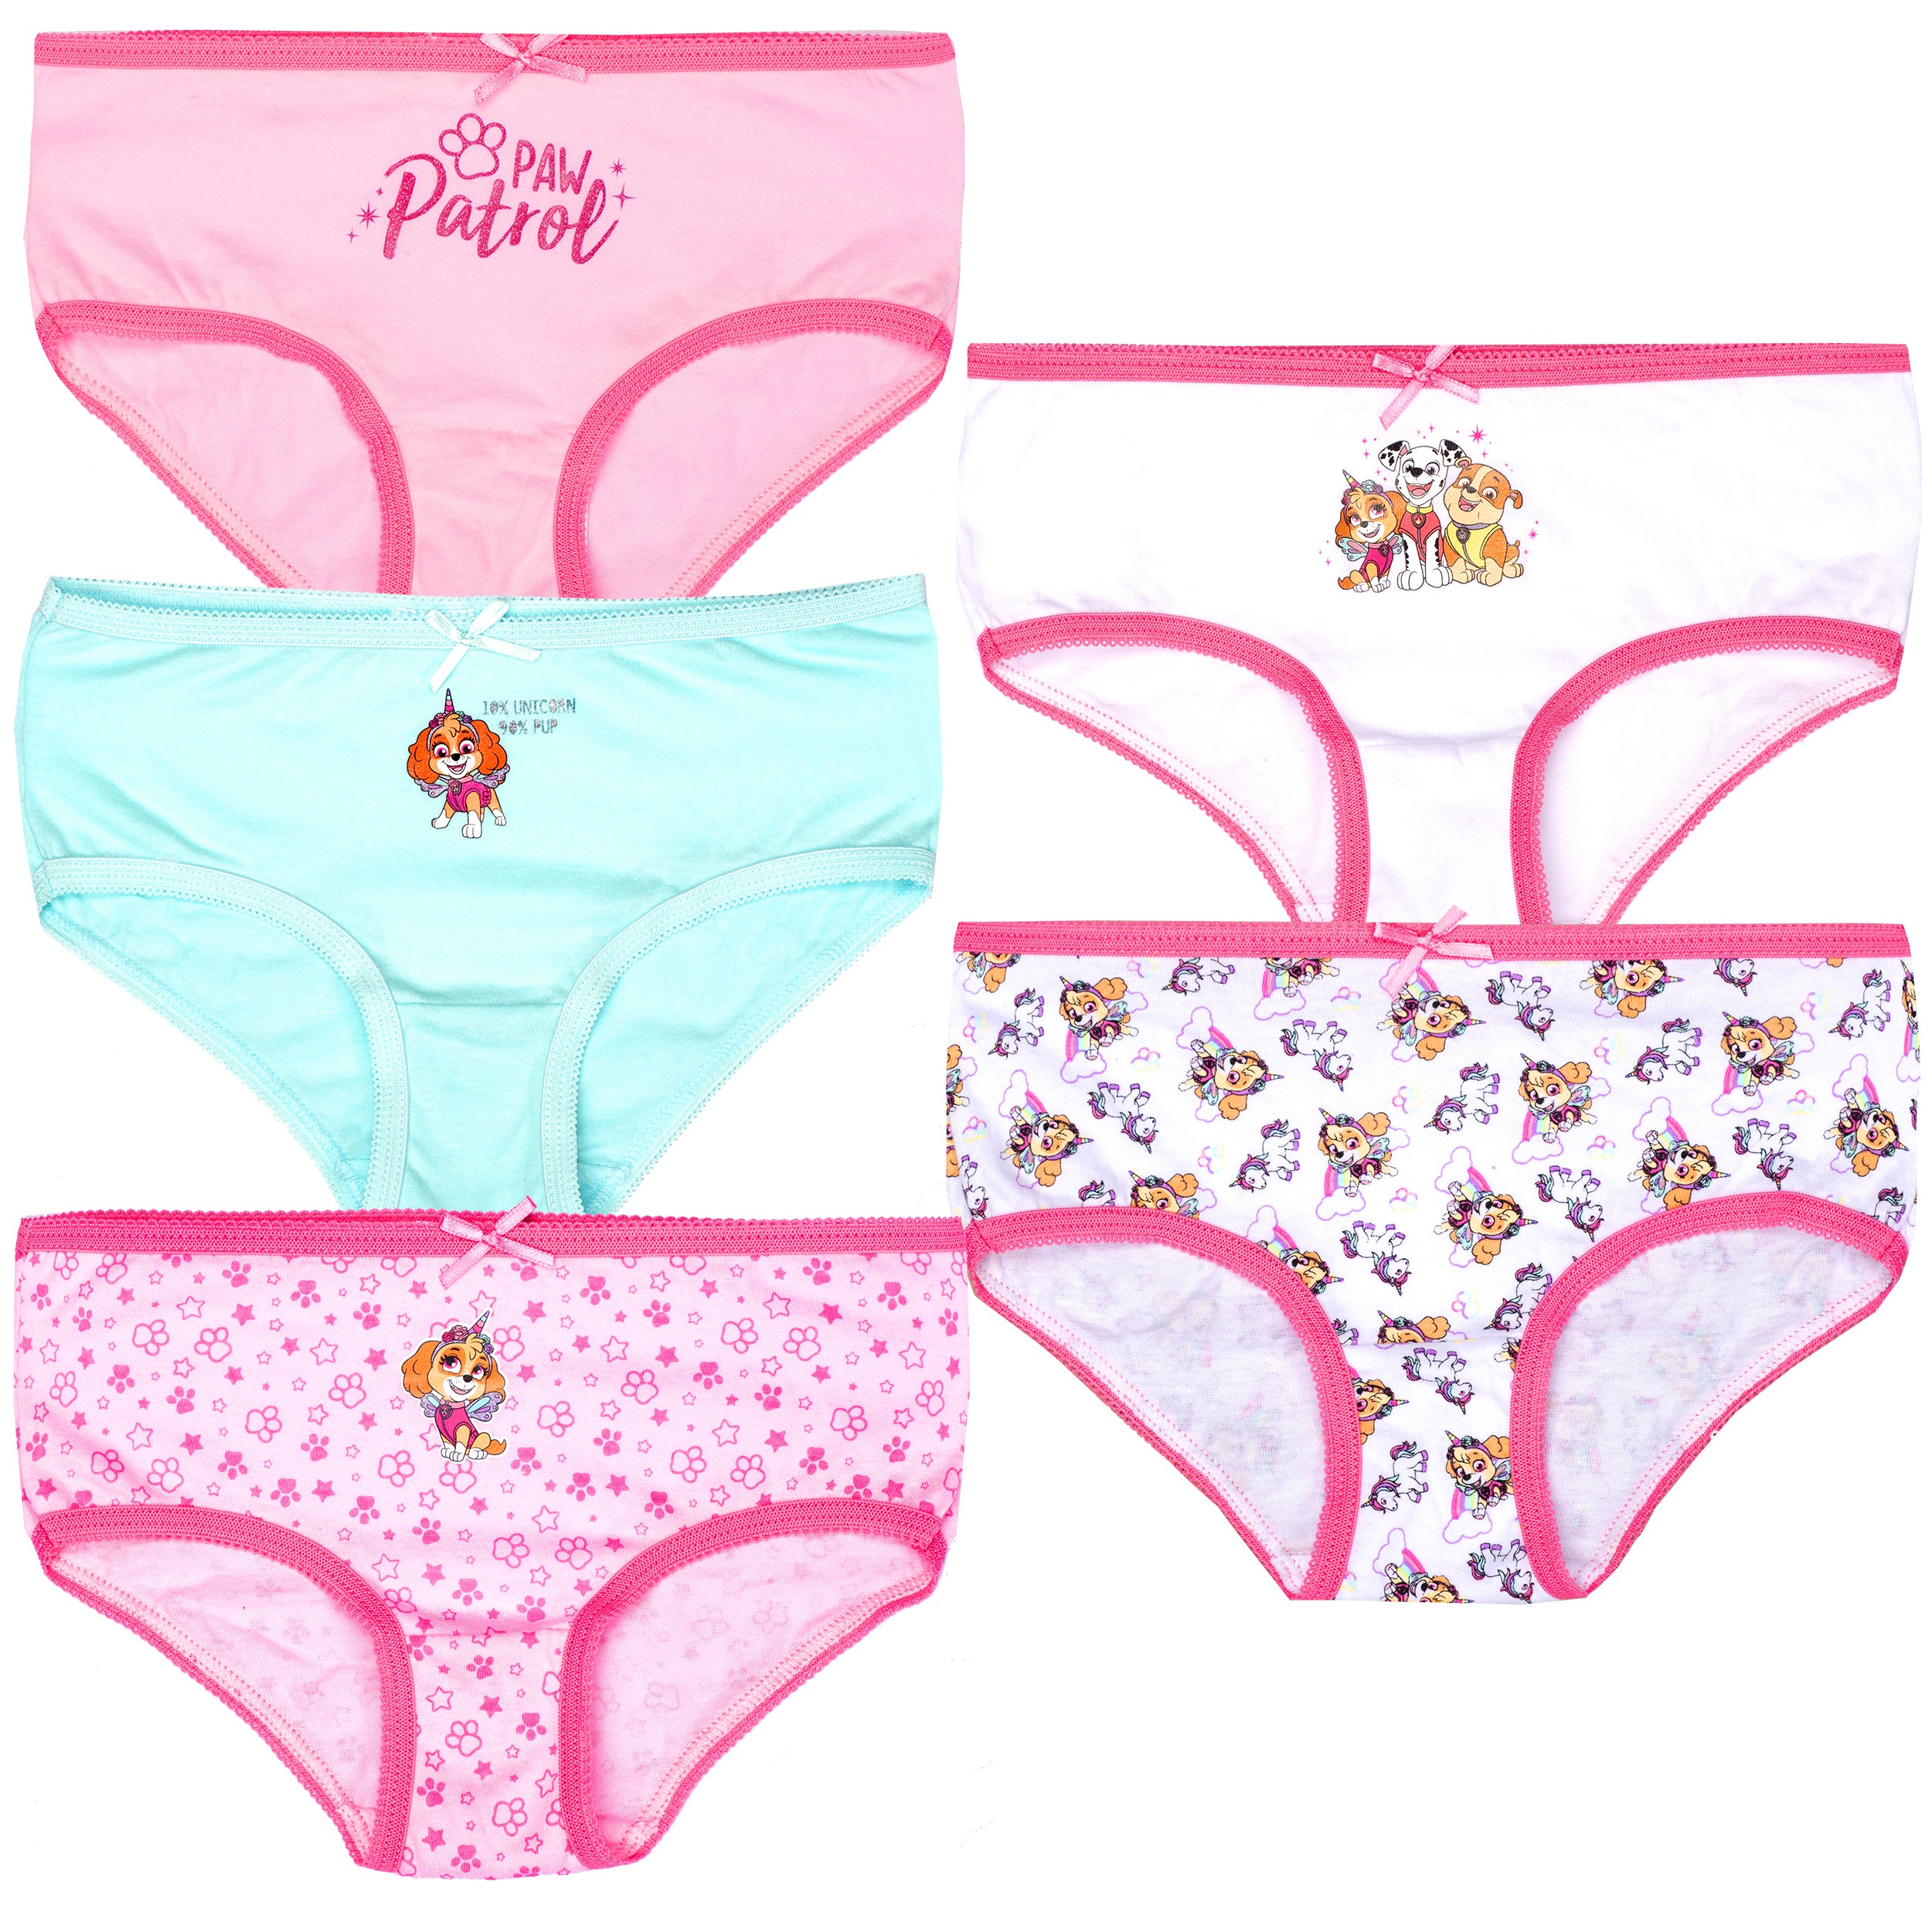 Buy Girls' Toddler Potty Training Pants with Chase, Skye & More